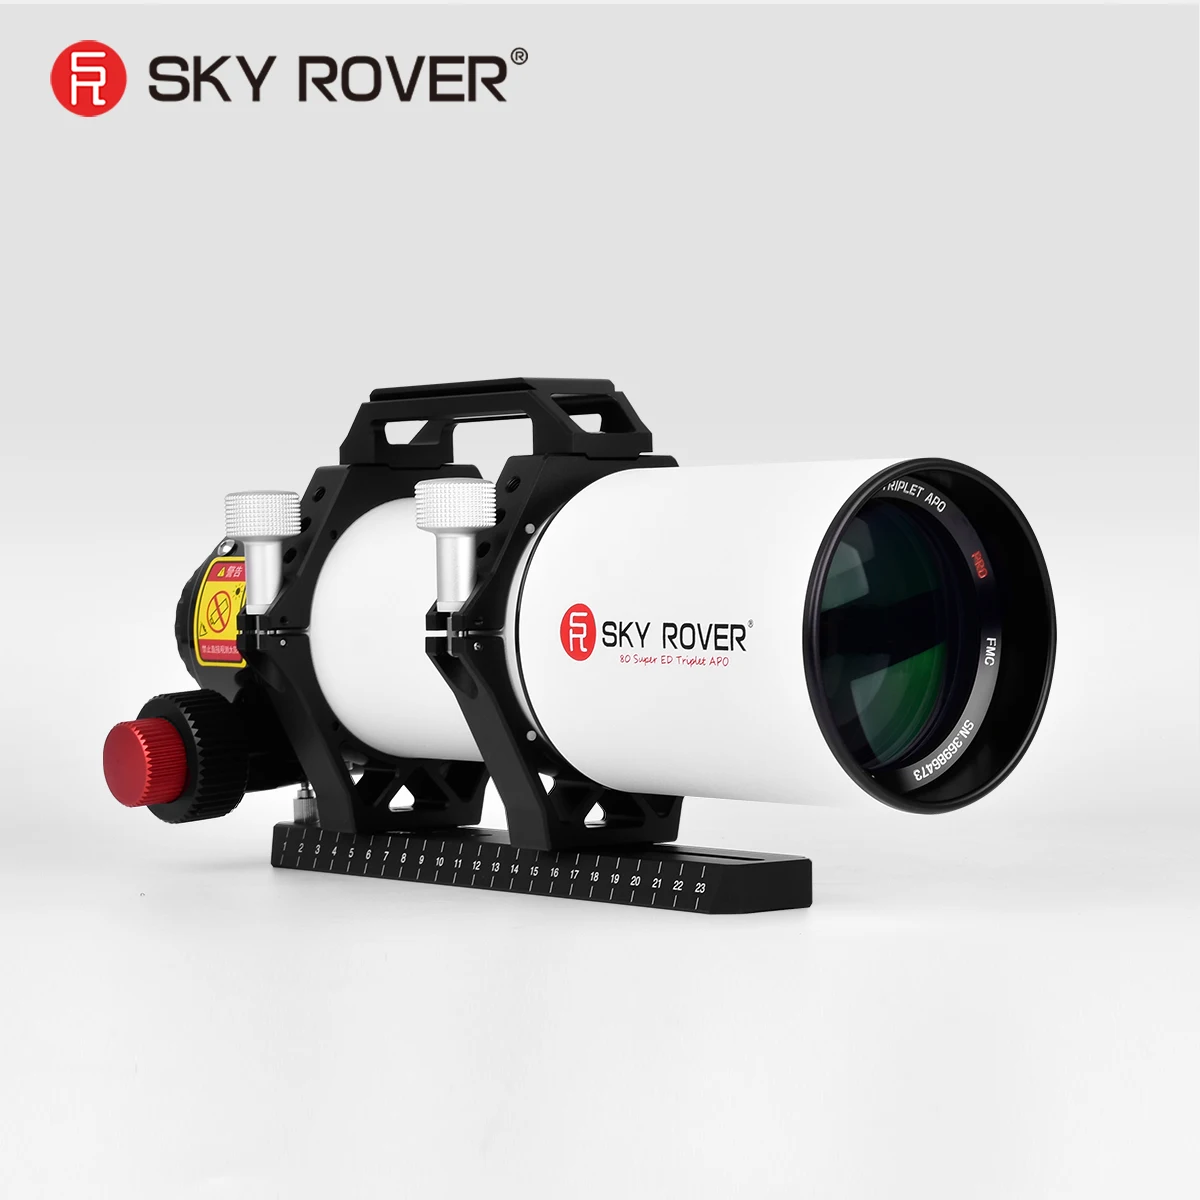 

Sky Rover 80 APO PRO F/6 Super ED Triplet Apochromatic Multifunctional Astronomical Telescope Photography